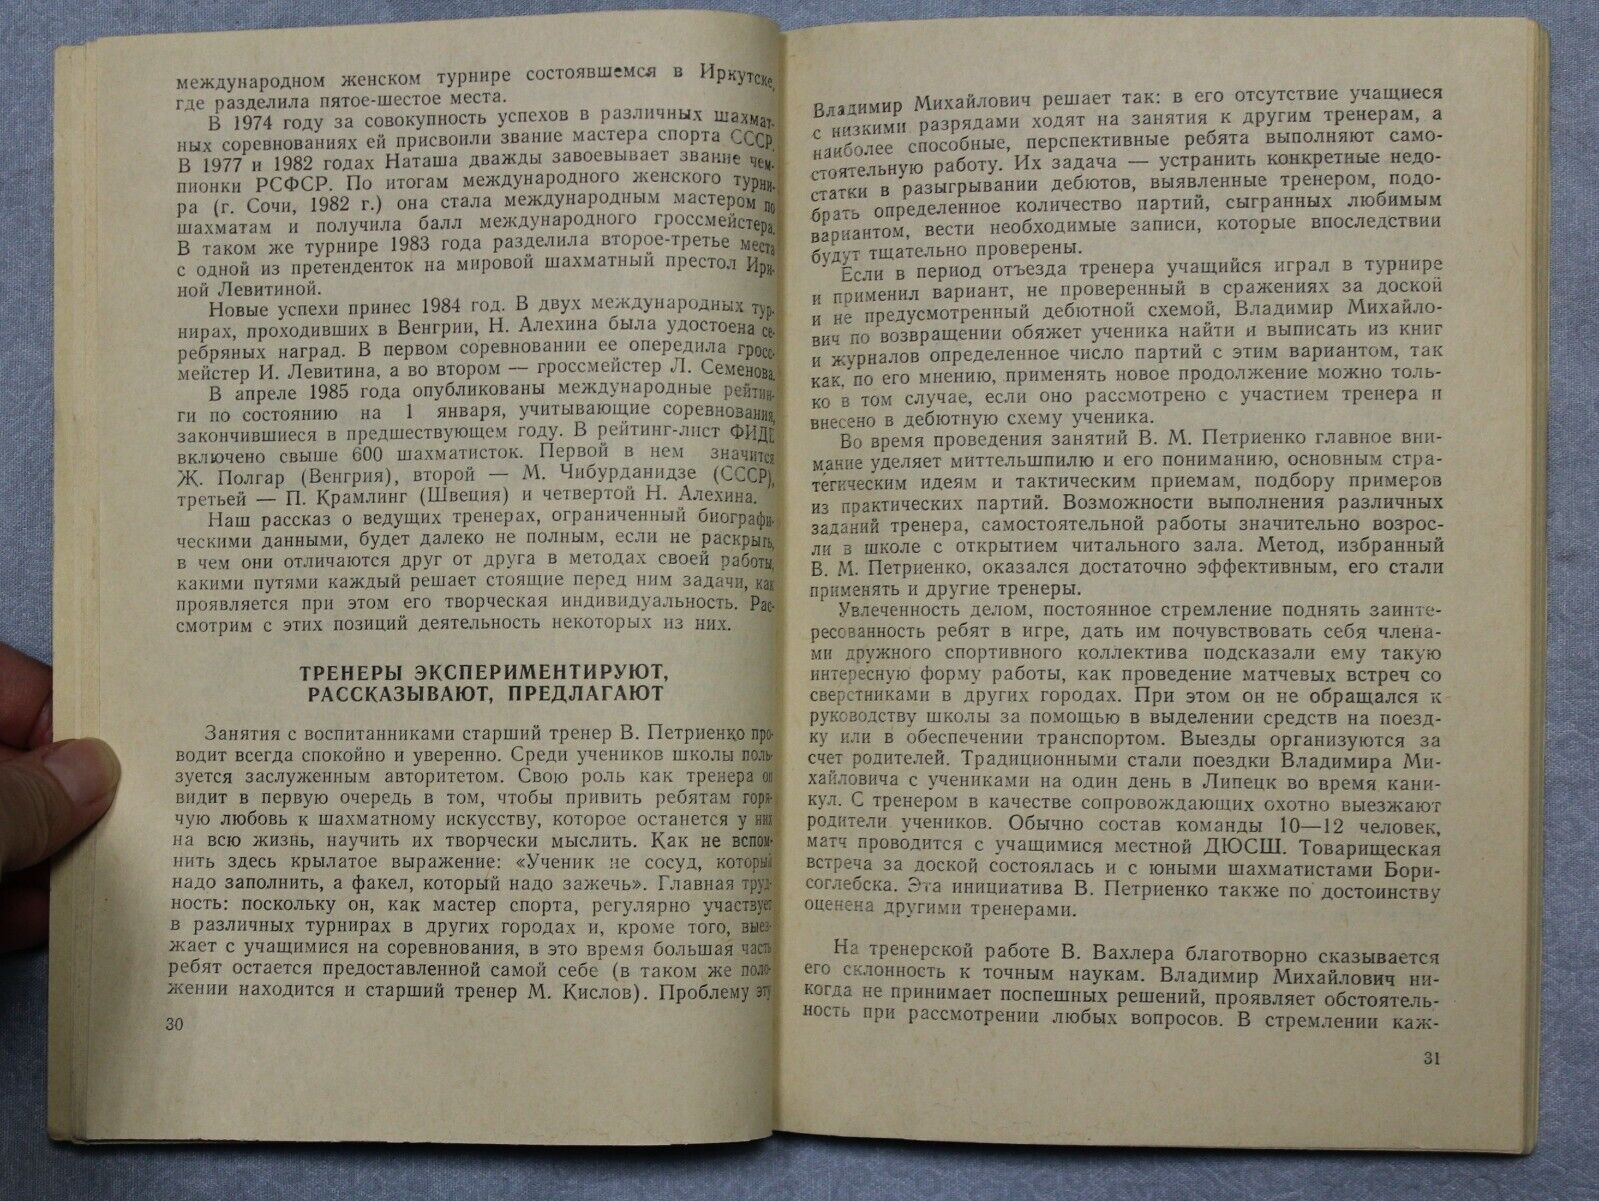 11063.Chess book: Chess School For Young, Voronezh 1985